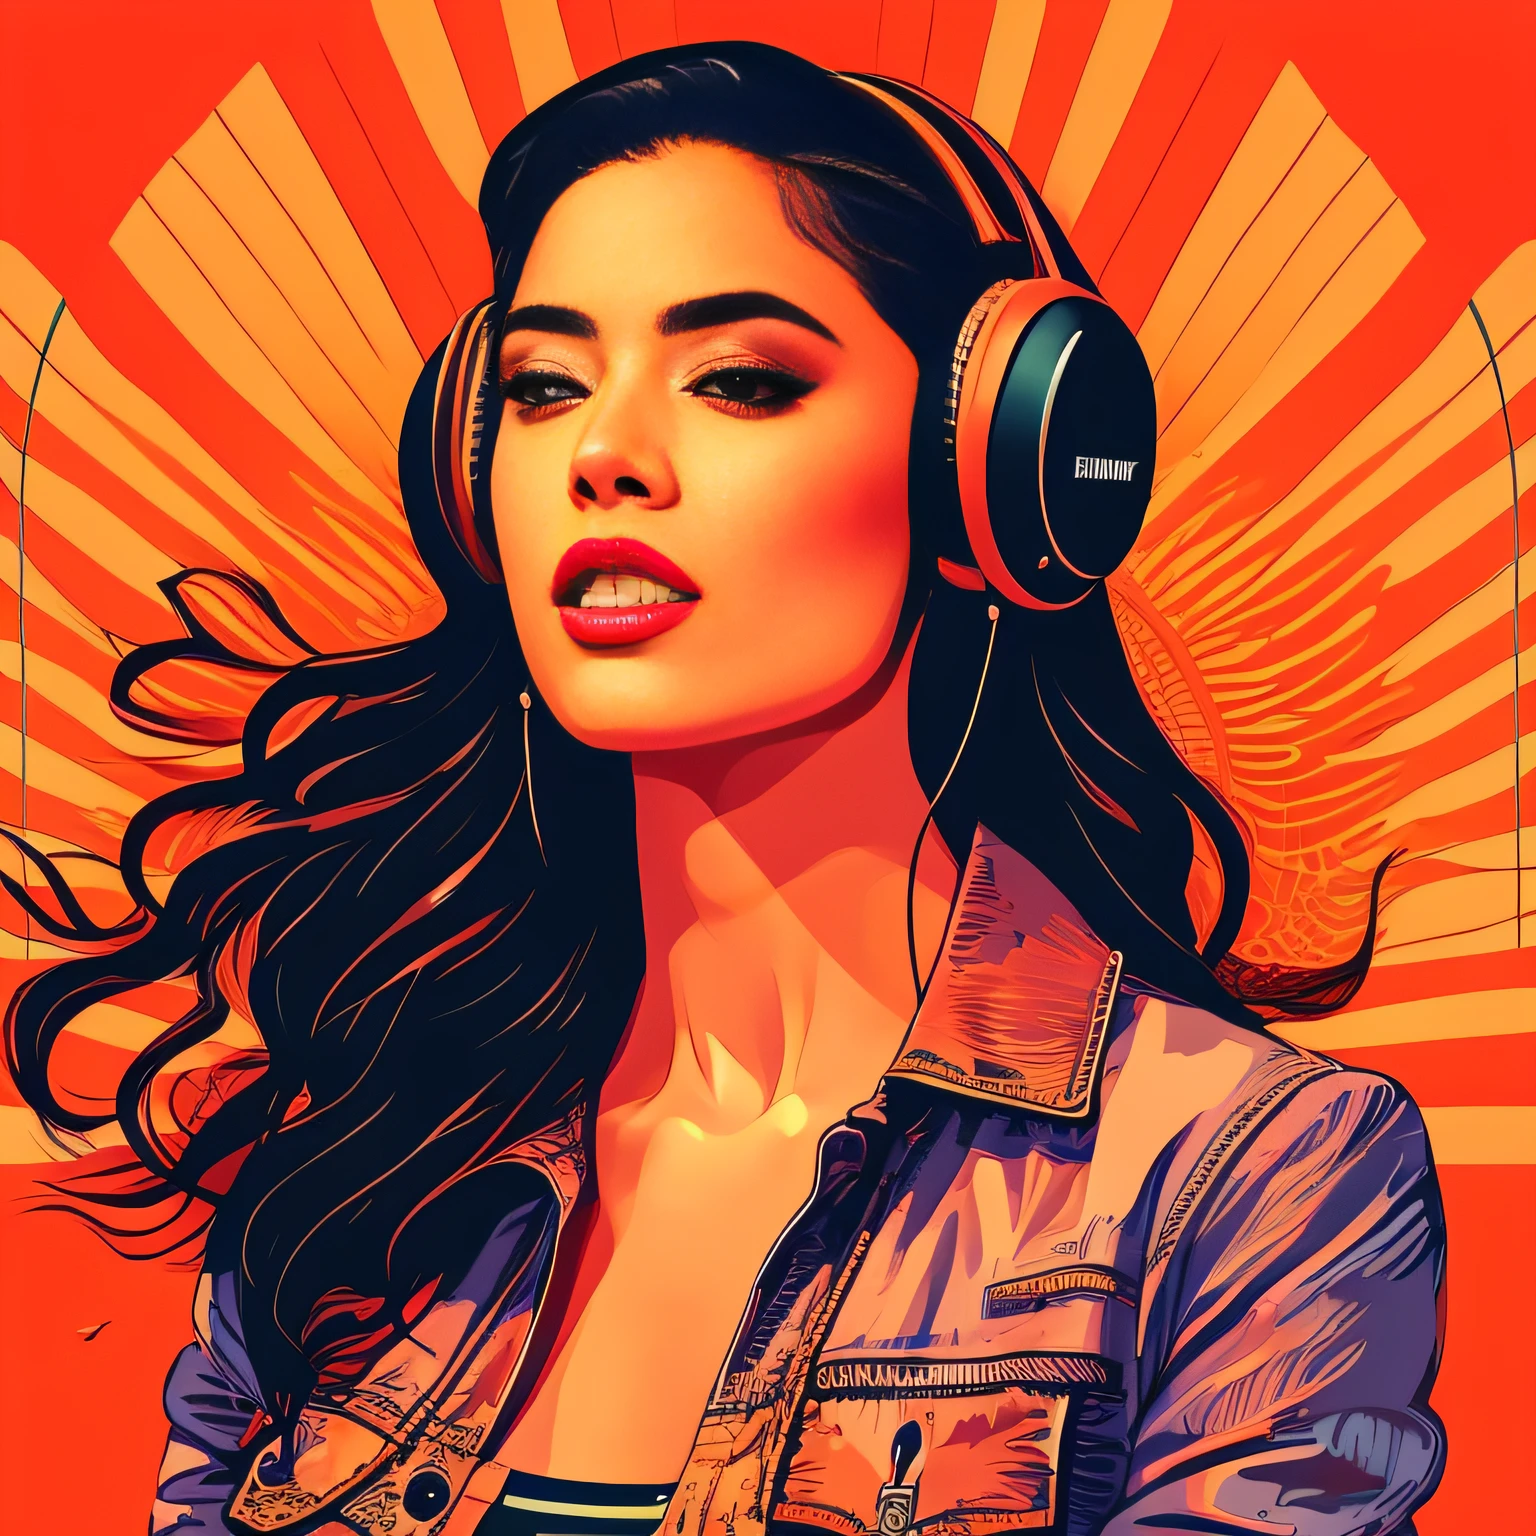 (masterpiece, best quality, beautiful:1.4), a woman with headphones on singing into a microphone, in style of digital illustration, vector artwork, vector art style, extremely high quality artwork, vector style drawing, vector art, jen bartel, digital art style, lowres, detailed vectorart, style digital painting, high quality artwork, digital art high quality, martin ansin artwork portrait, high quality portrait, wallpaper, 8k